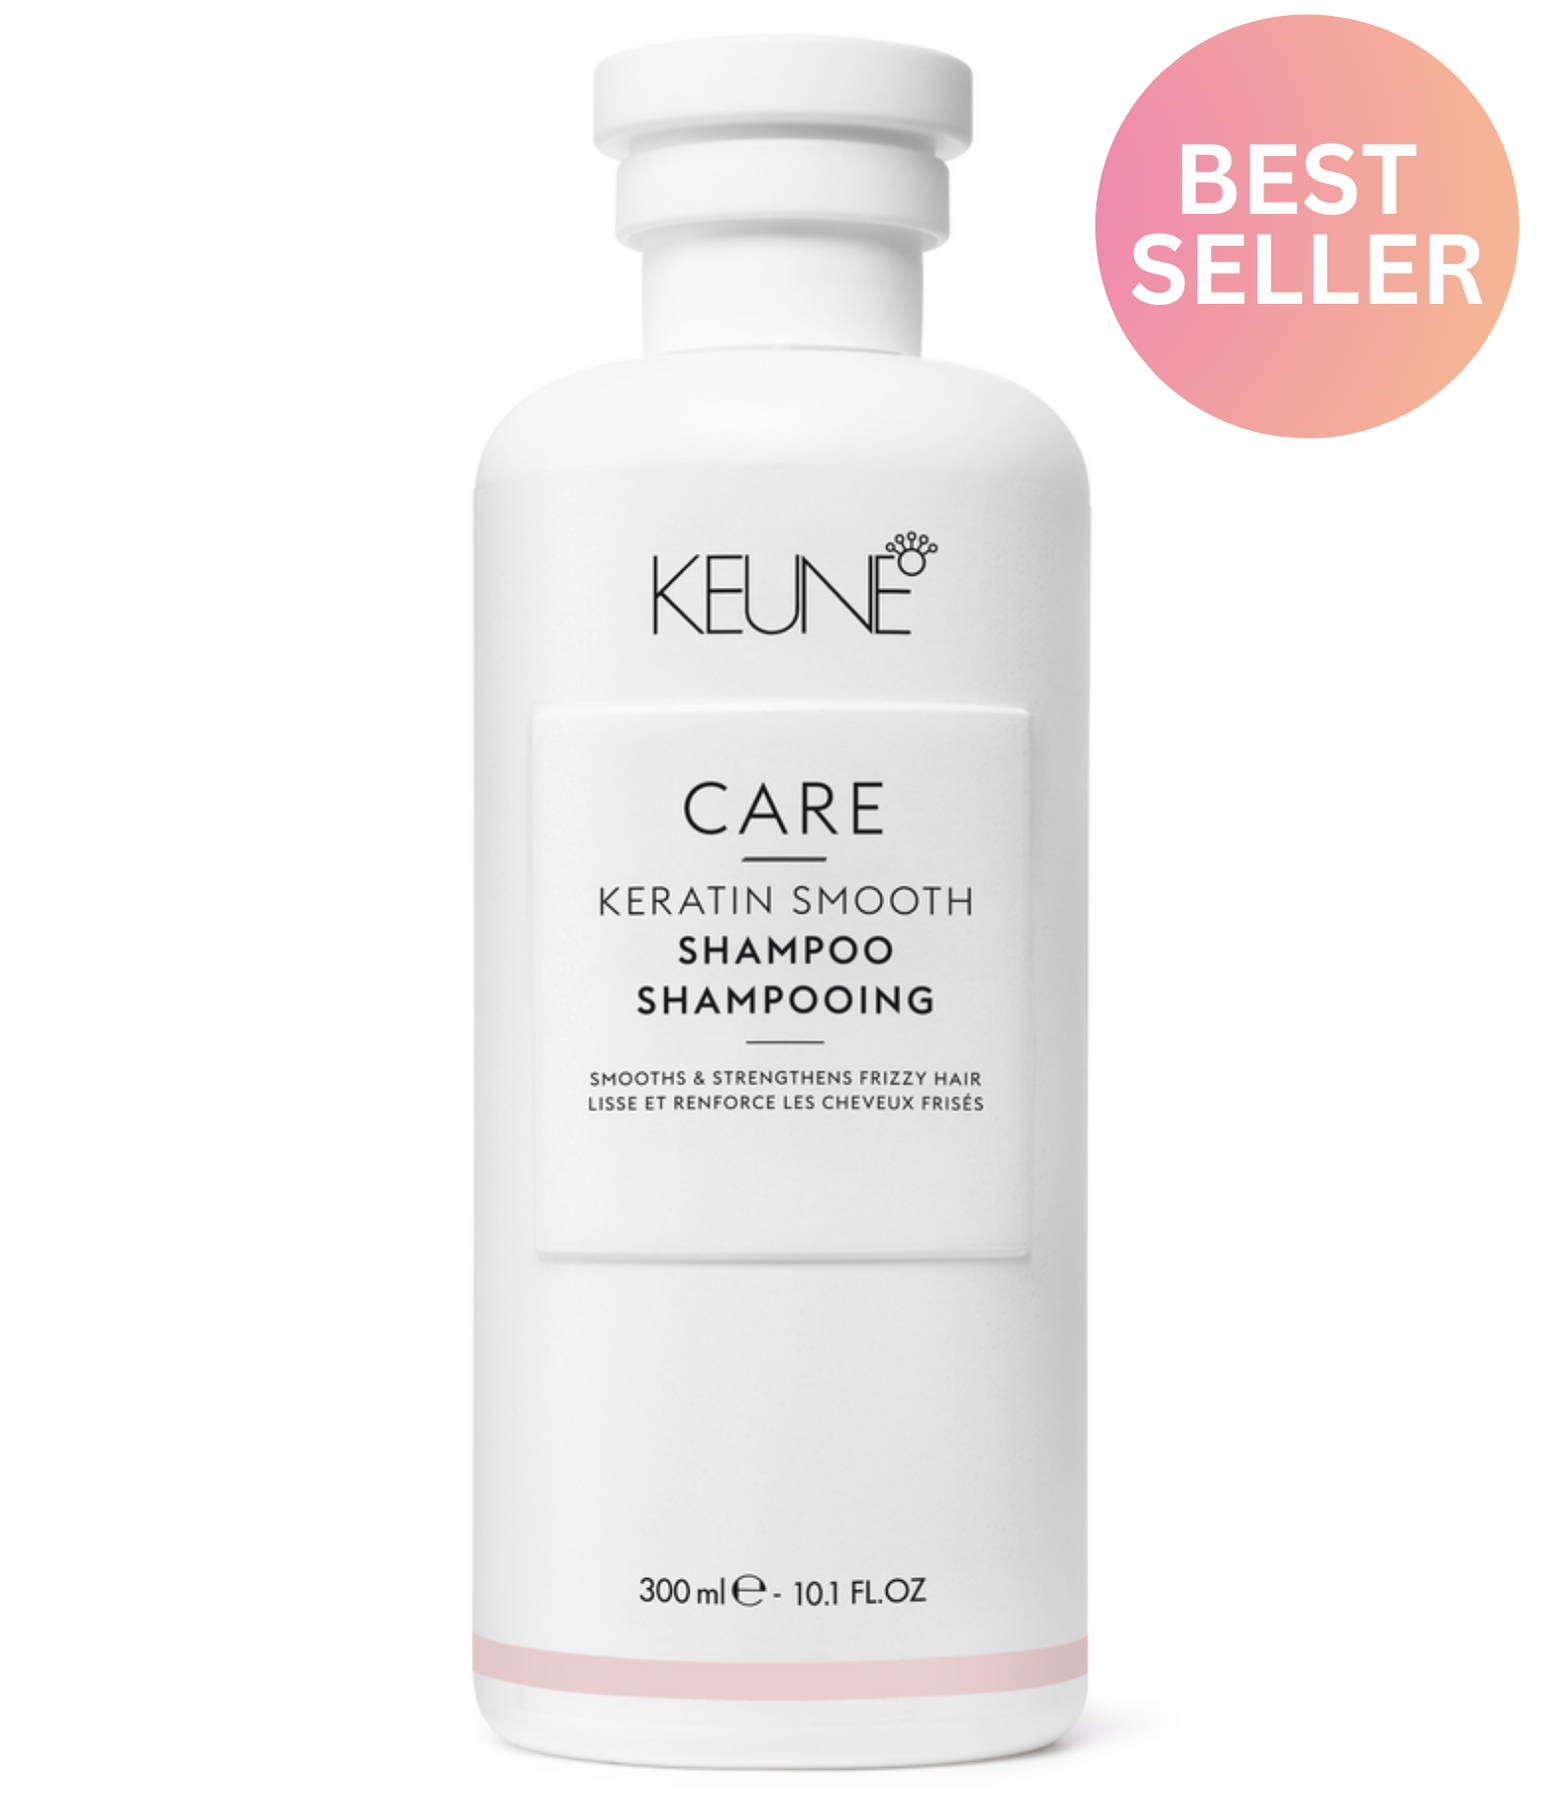 Discover smooth, frizz-free hair with the Keratin Smooth Shampoo. It nurtures, moisturizes, and strengthens dry hair. Experience the benefits of keratin. On keune.ch.